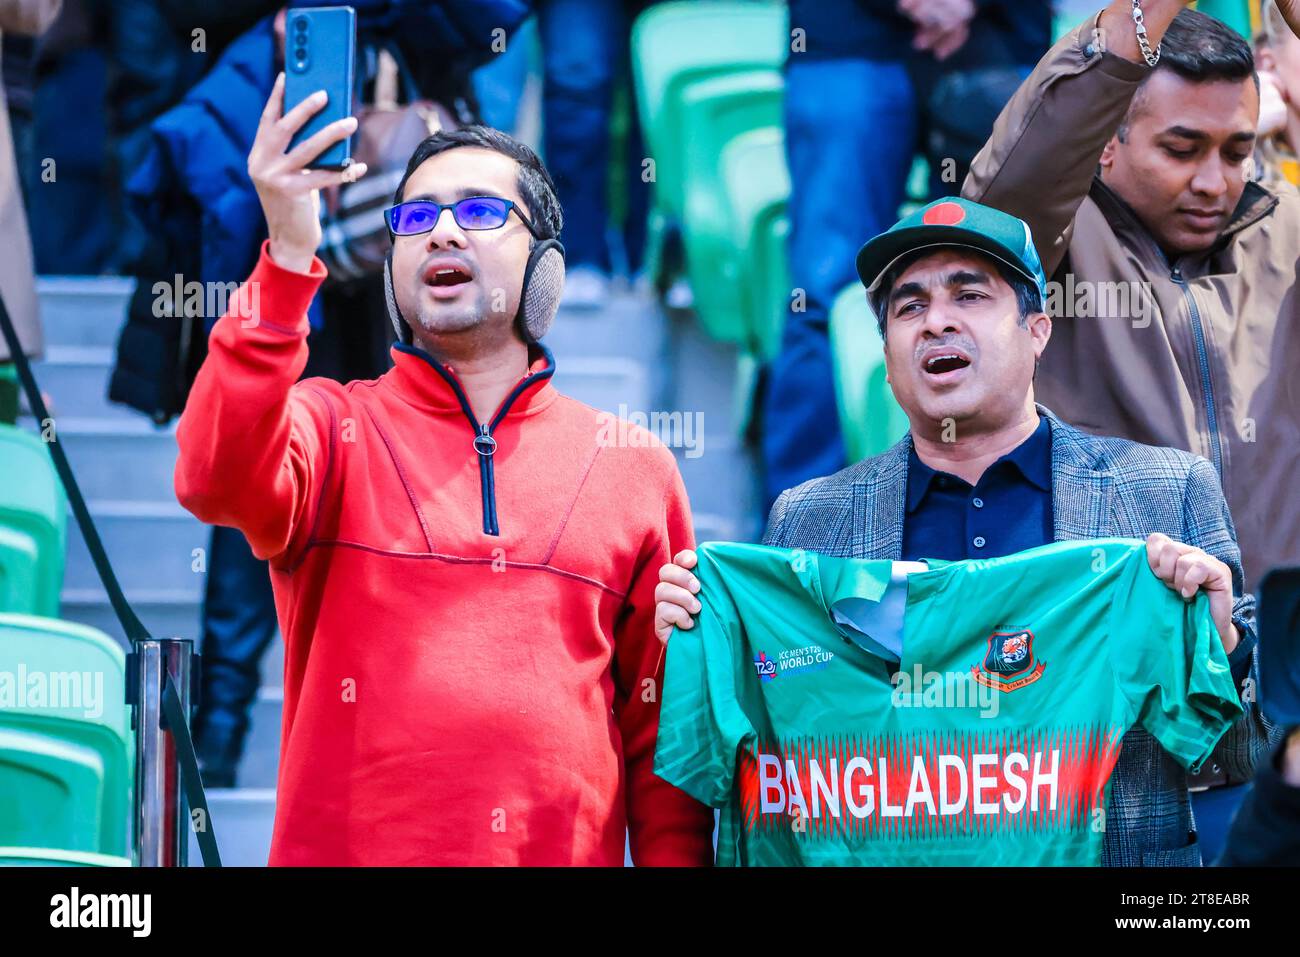 MELBOURNE, AUSTRALIA - NOVEMBER 16: National anthem atmosphere and Bangladesh fans before the 2026 FIFA World Cup Qualifier match between Australia So Stock Photo